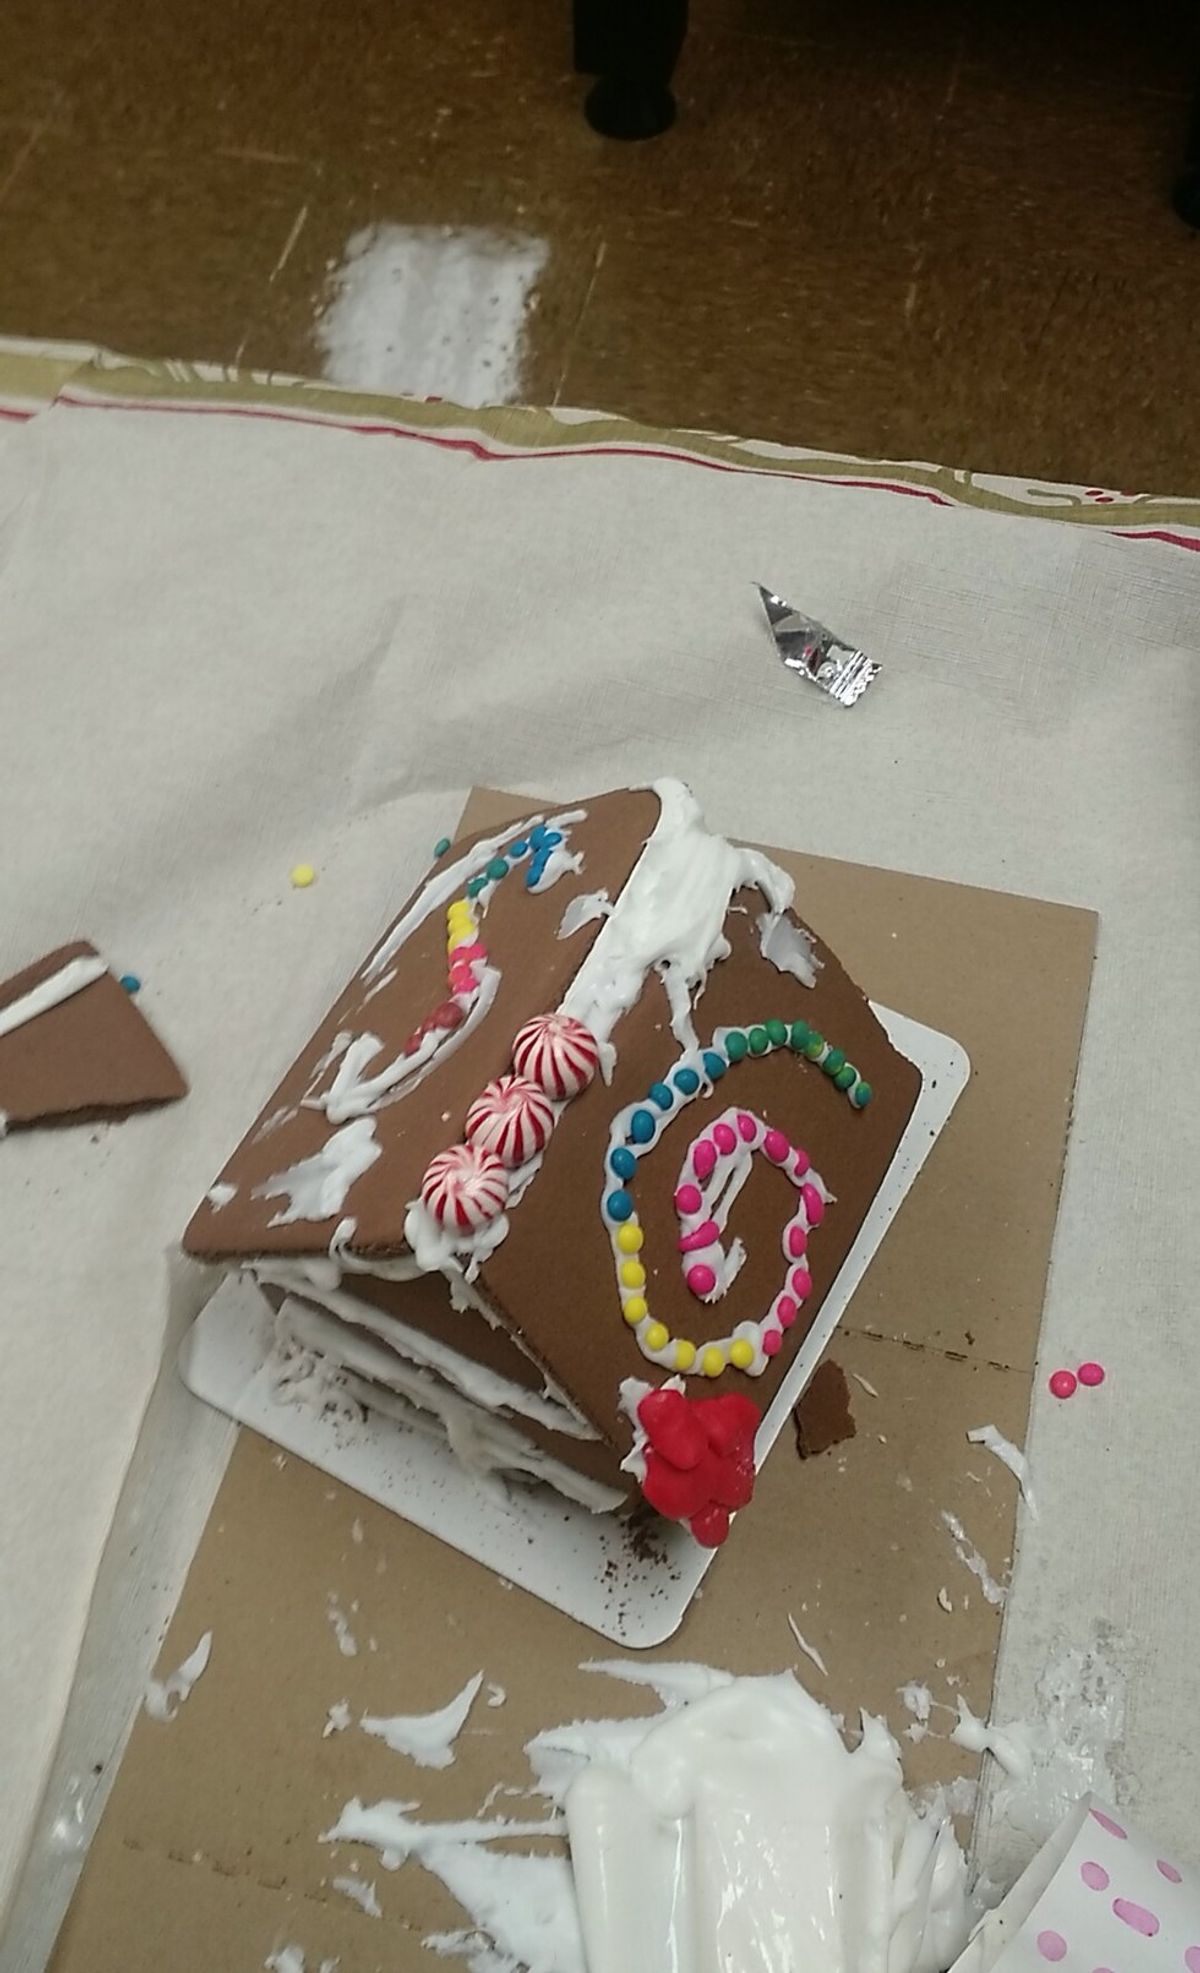 How To Fail Miserably At Gingerbread House Construction And Have A Great Time